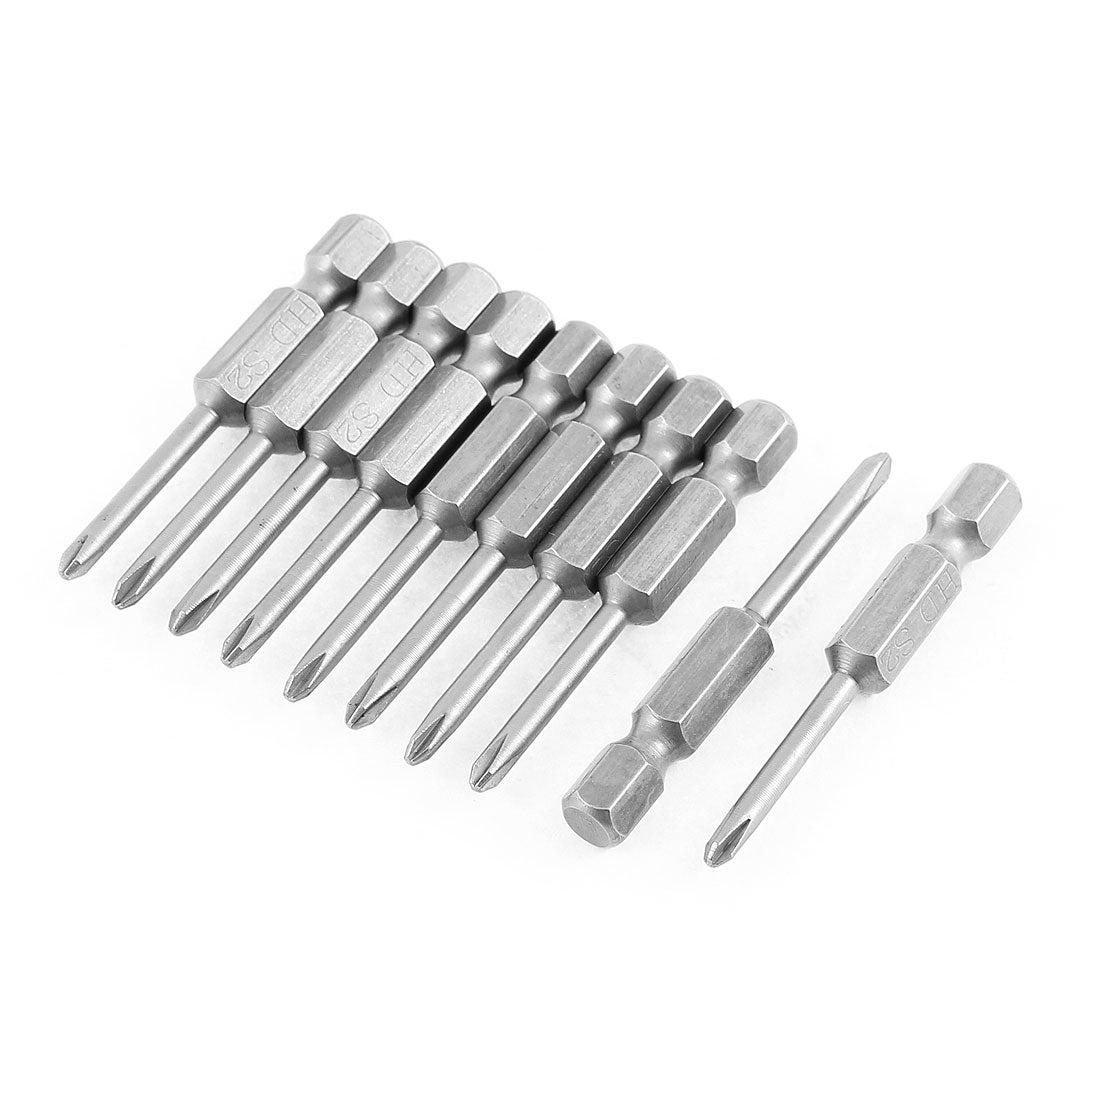 Uxcell Uxcell 10 Pcs 1/4" Hex Shank PH1 3mm Magnetic Phillips Crosshead Screwdriver Bit 50mm Long